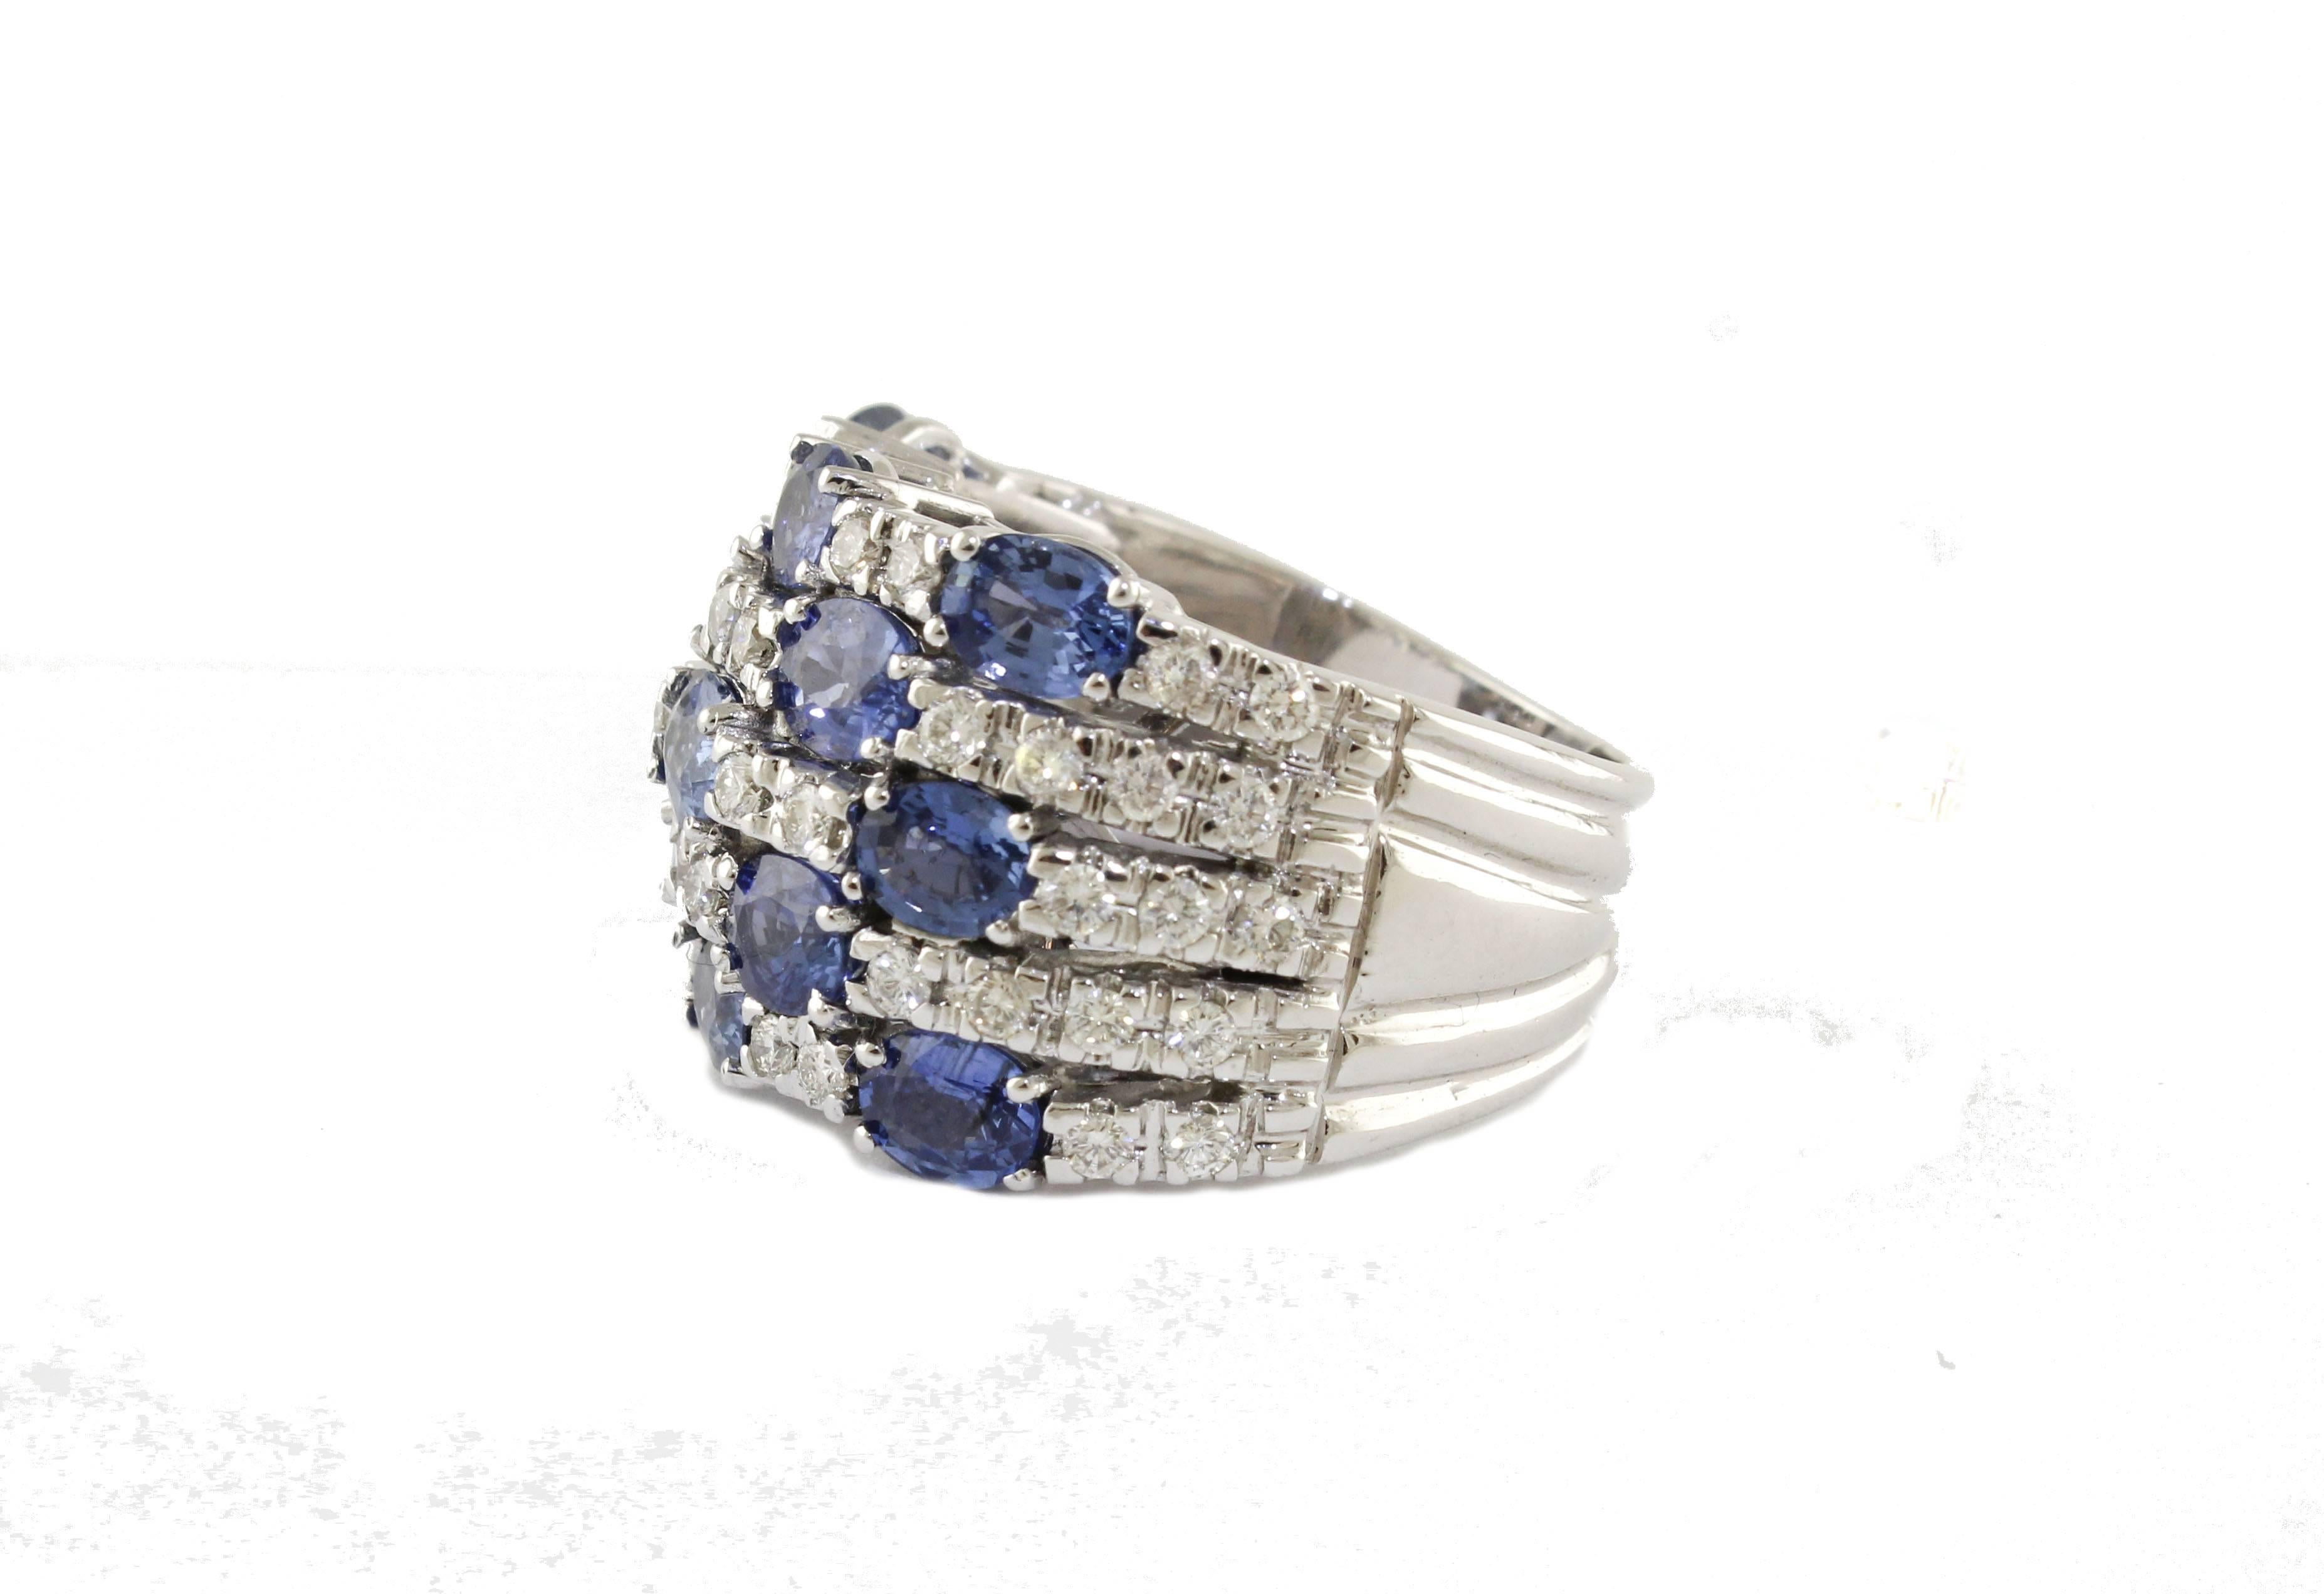 Fantastic band ring, 14 kt white gold, with 1.44 ct diamonds alternating with very bright 7.41 ct sapphires. Total weight g 17.10
Diamonds ct 1.44
Sapphires ct 7.41
Total weight g 17.10
Size ita 19.5
Size franc 19.75
Size uses 9
R.F +hhia
